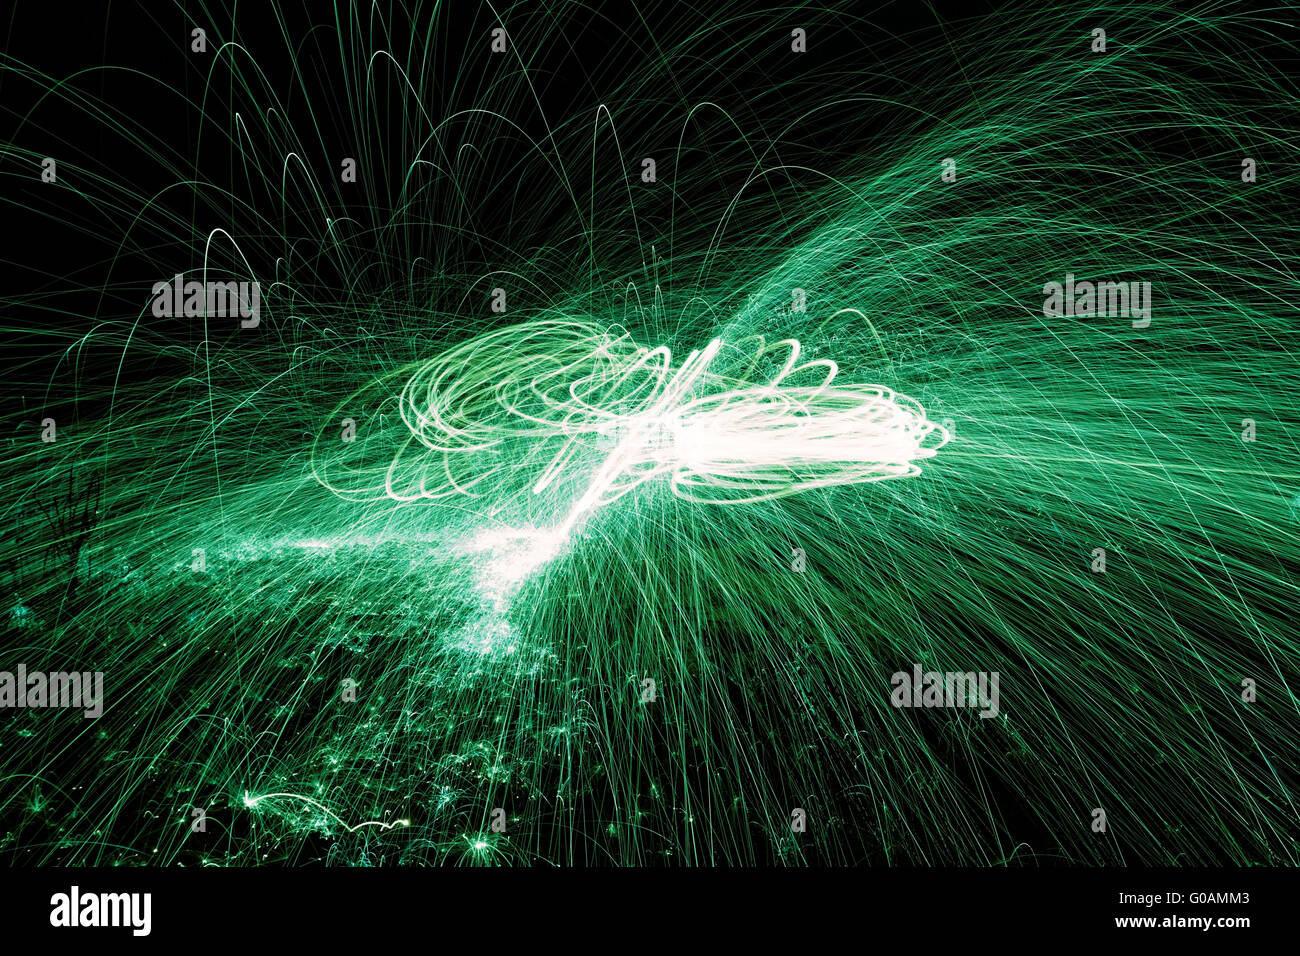 Showers of hot glowing sparks from spinning steel wool. Stock Photo